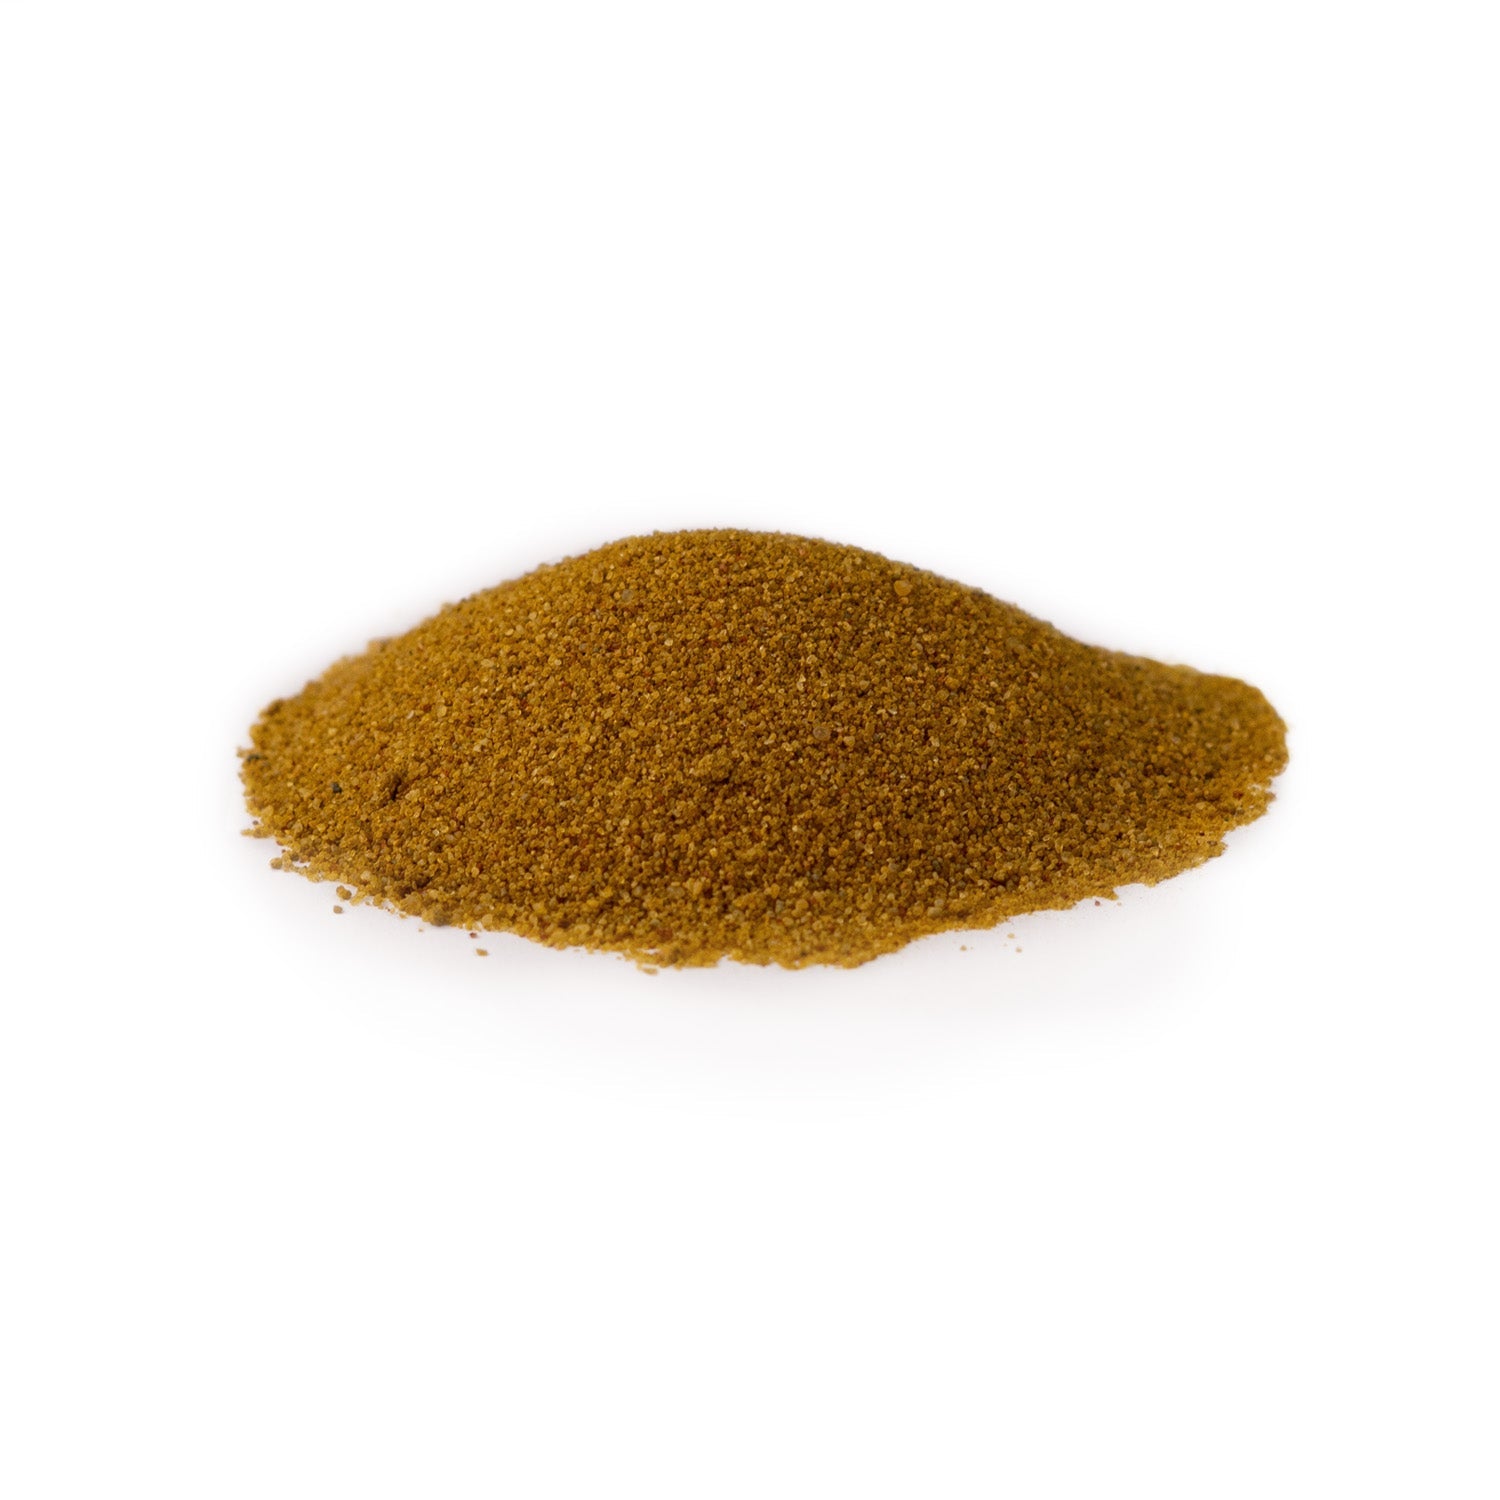 Yellow Sand (250g) - AntKeepers